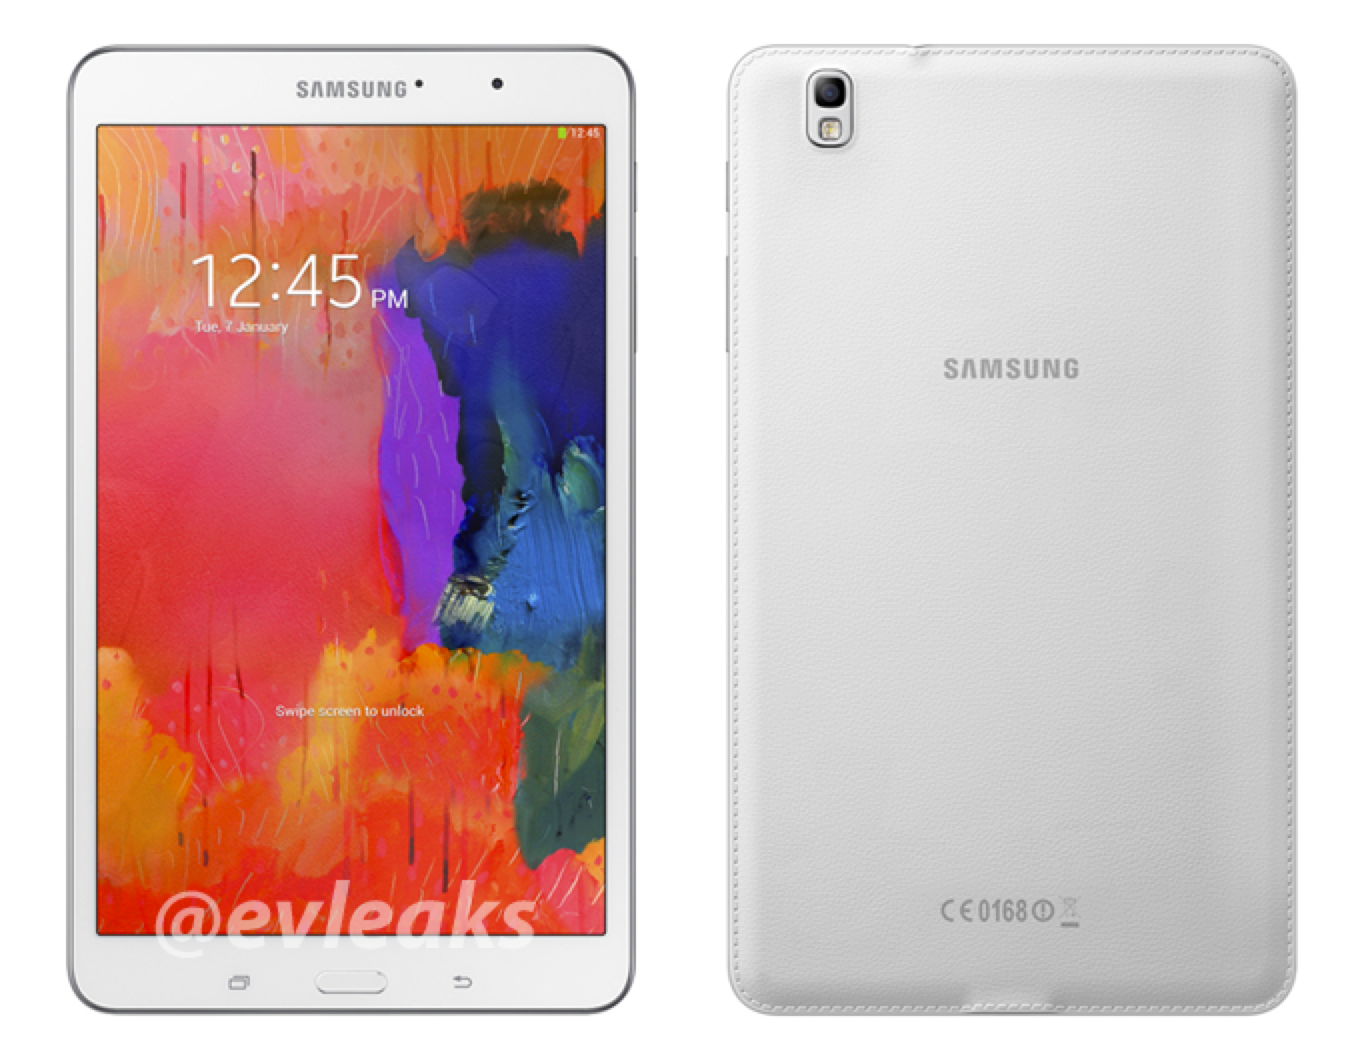 samsung banner outs galaxy note pro and galaxy tab pro a few hours early updated image 3